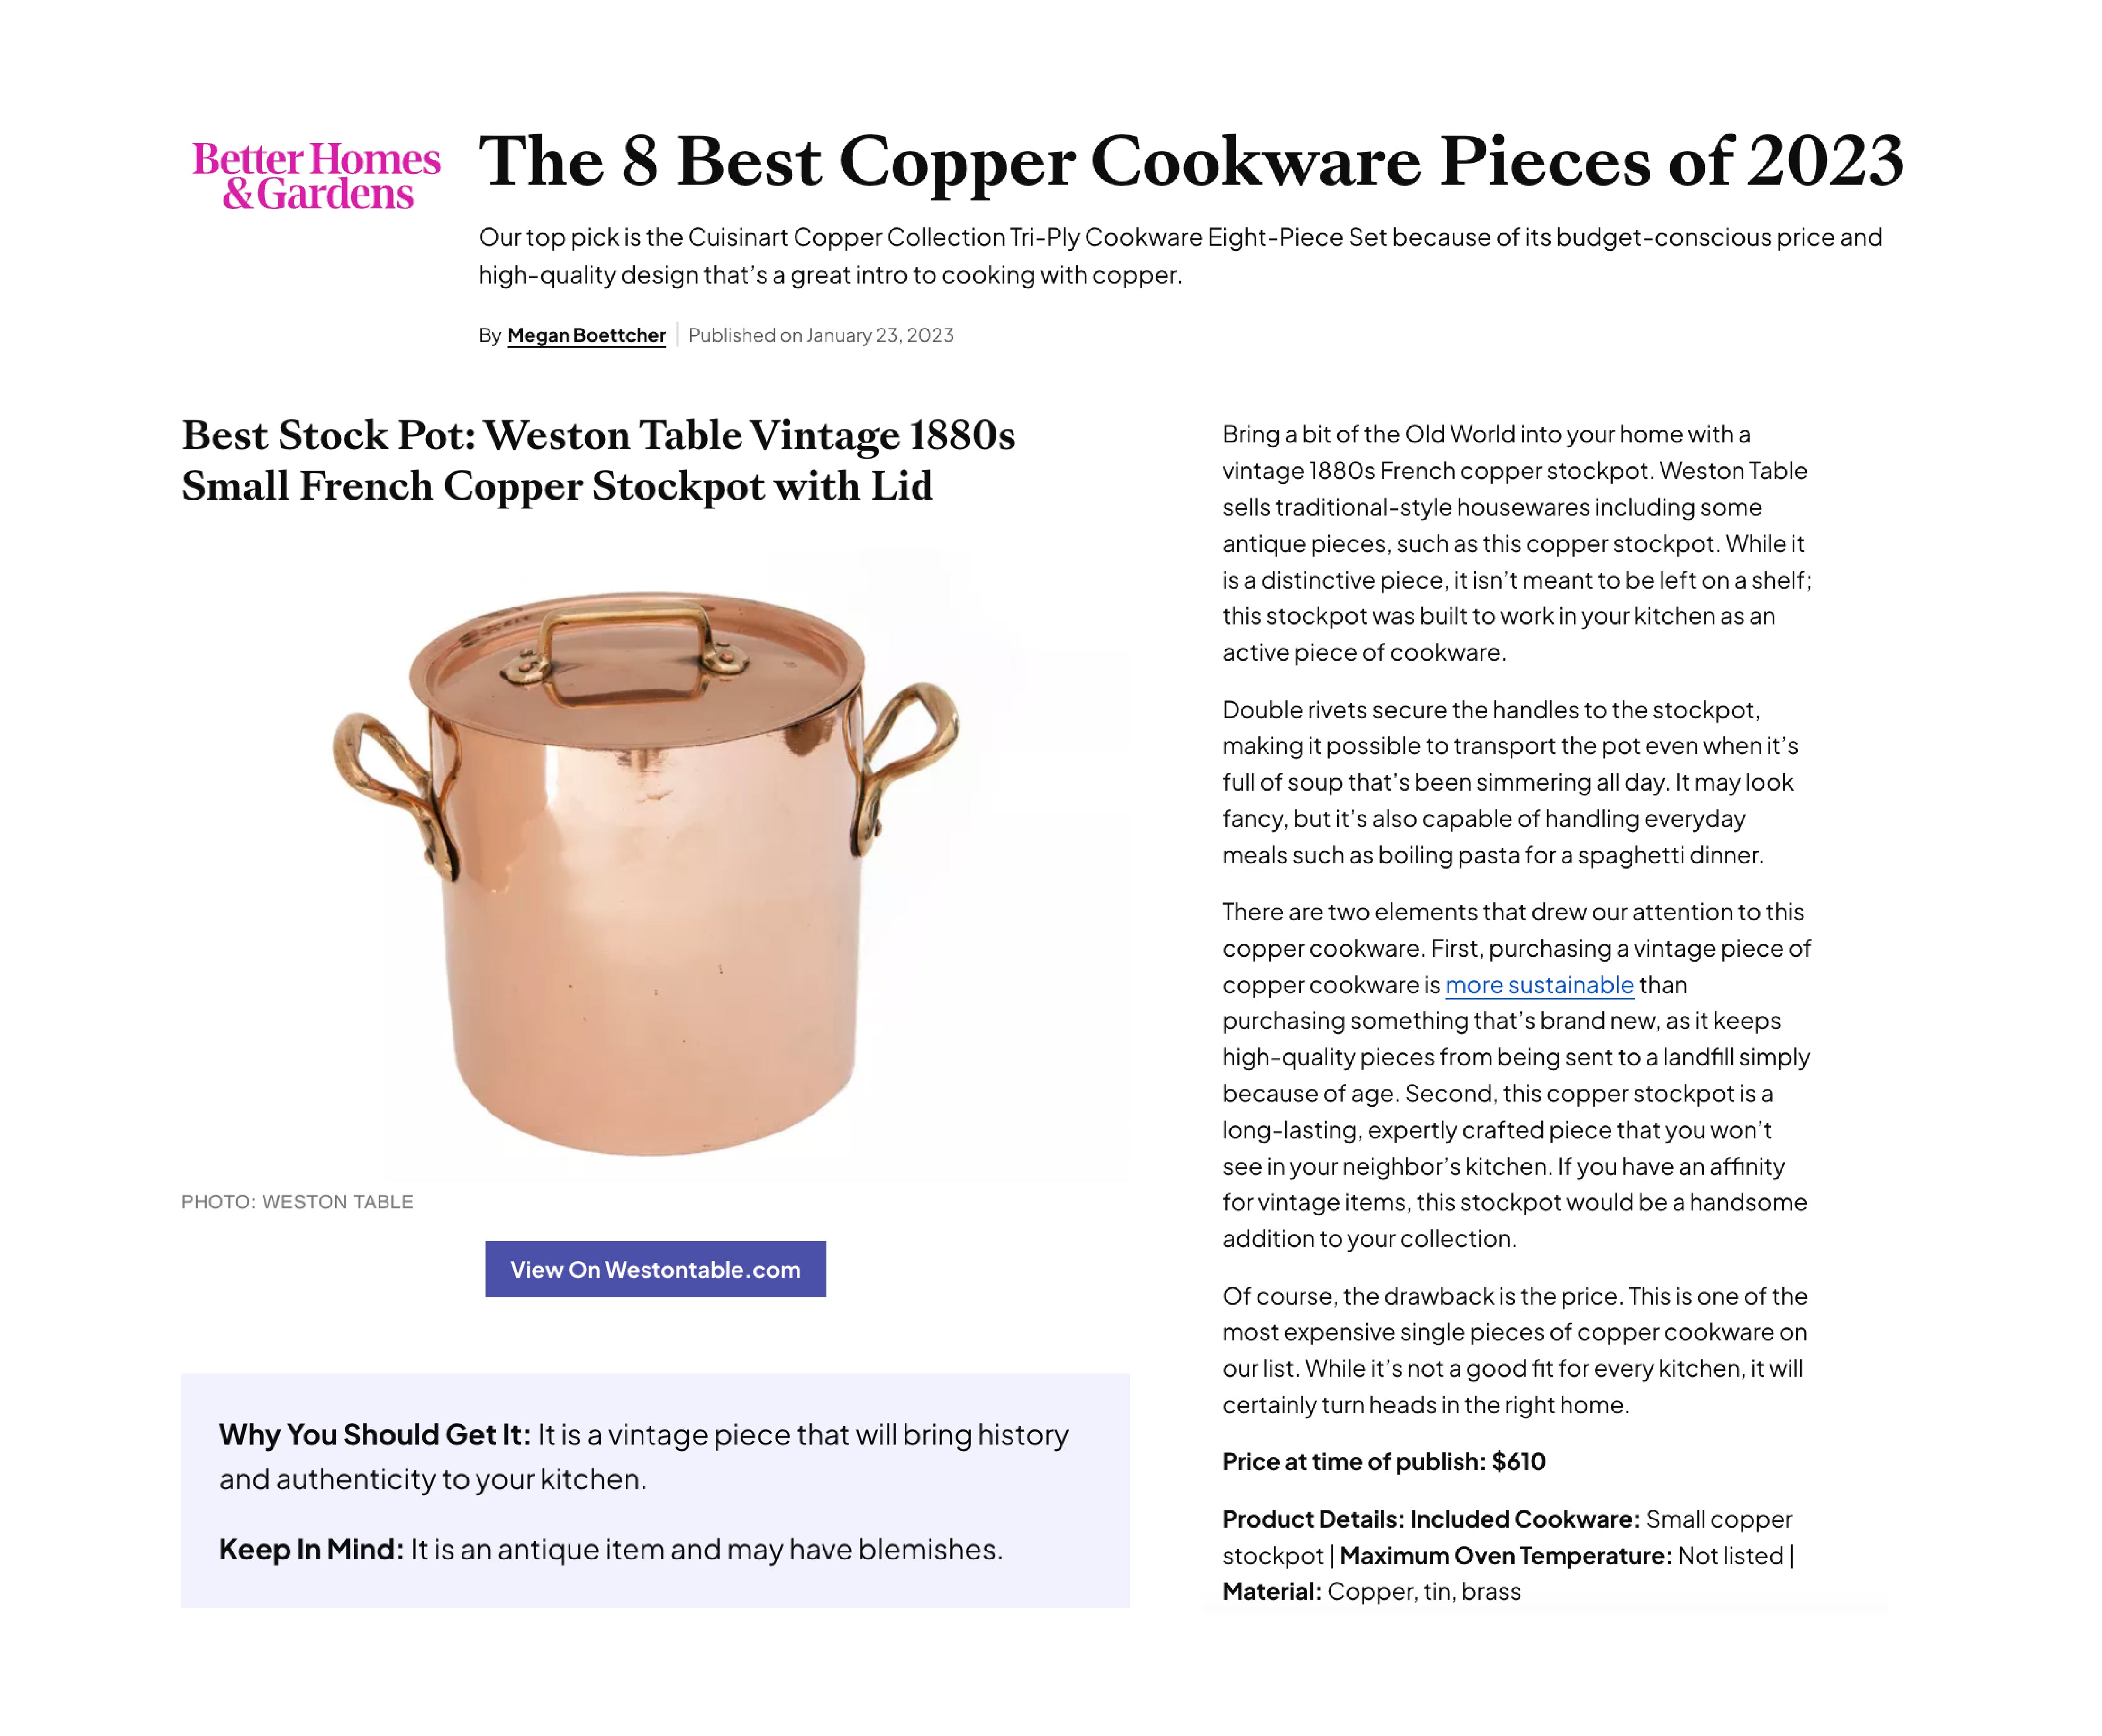 Better Homes & Gardens: The 8 Best Copper Cookware Pieces of 2023